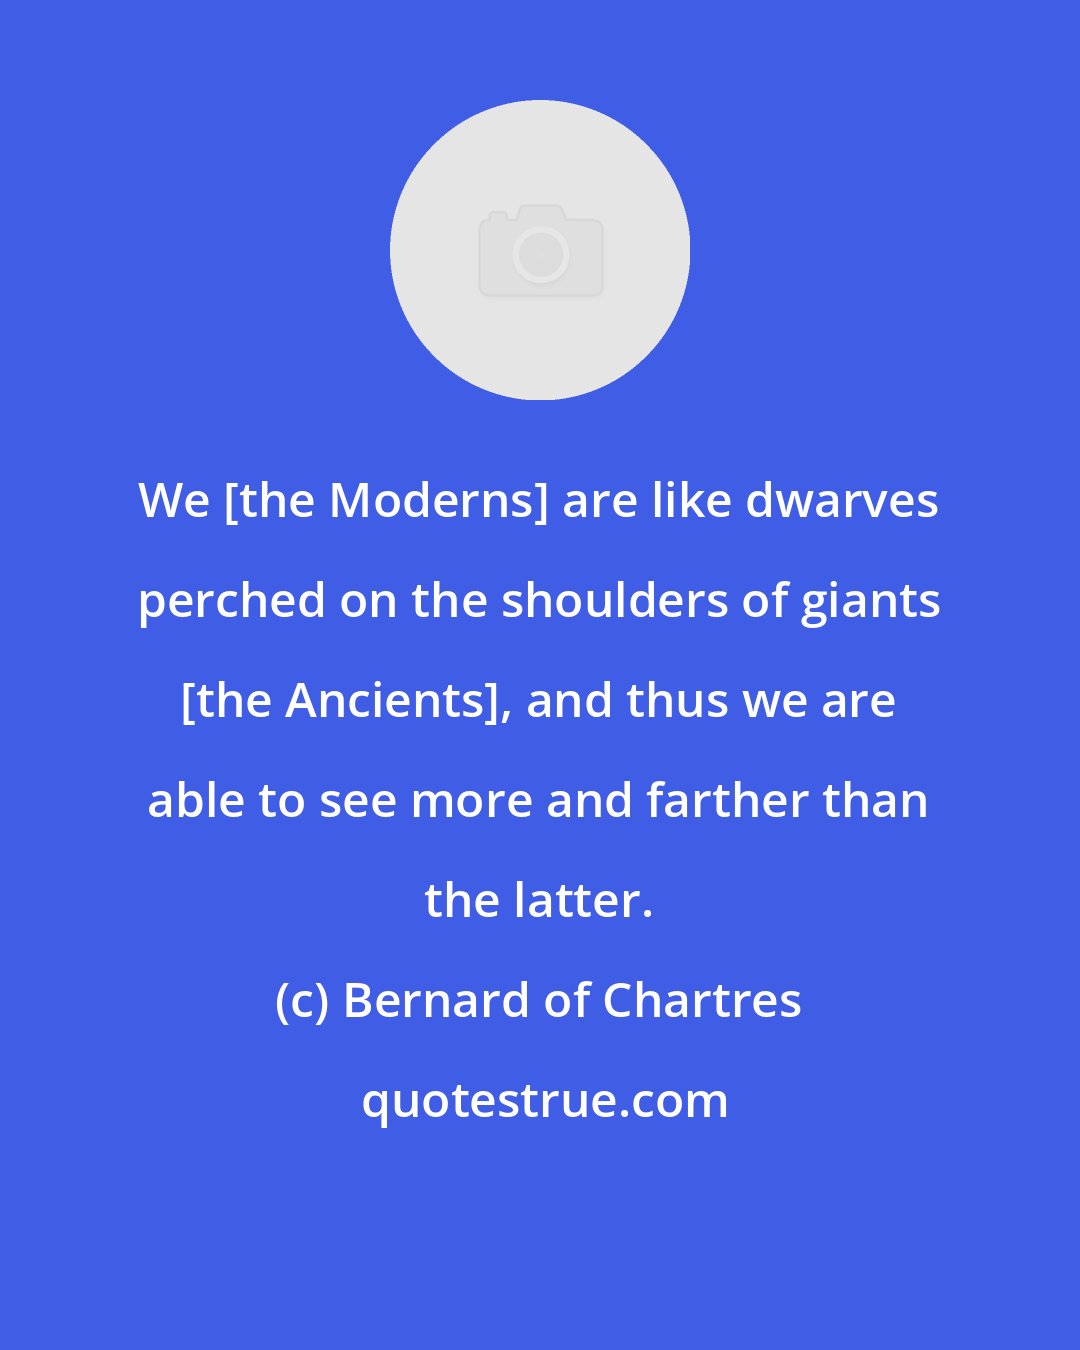 Bernard of Chartres: We [the Moderns] are like dwarves perched on the shoulders of giants [the Ancients], and thus we are able to see more and farther than the latter.